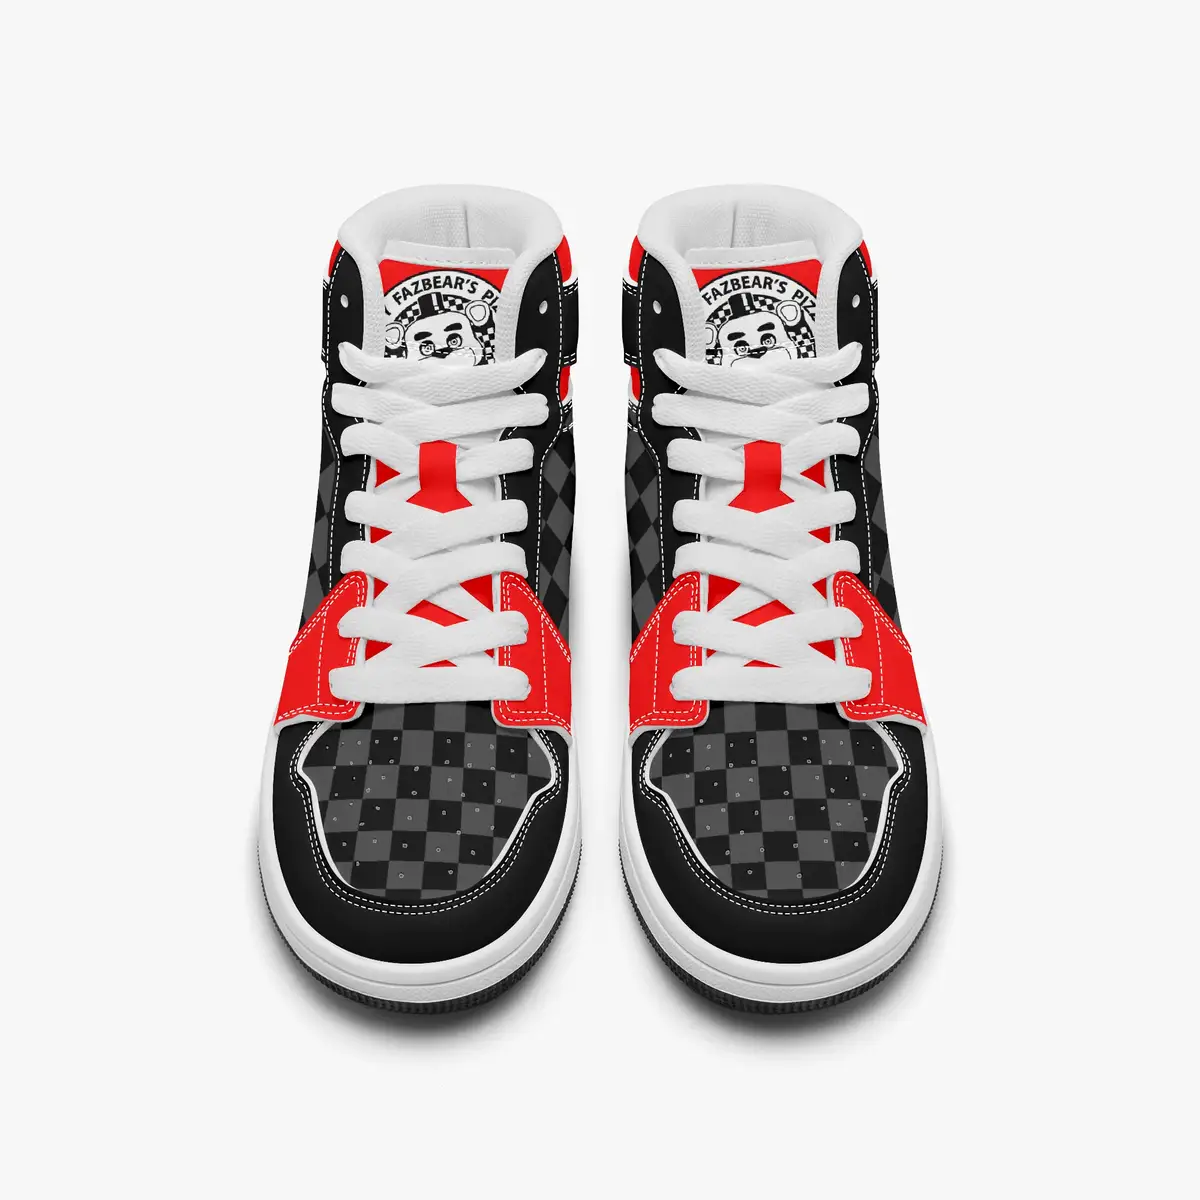 Five Nights at Freddy’s Inspired Character High-Top Kids Black and Red Leather Shoes, FNAF Jordans Style Sneakers Cool Kiddo 16